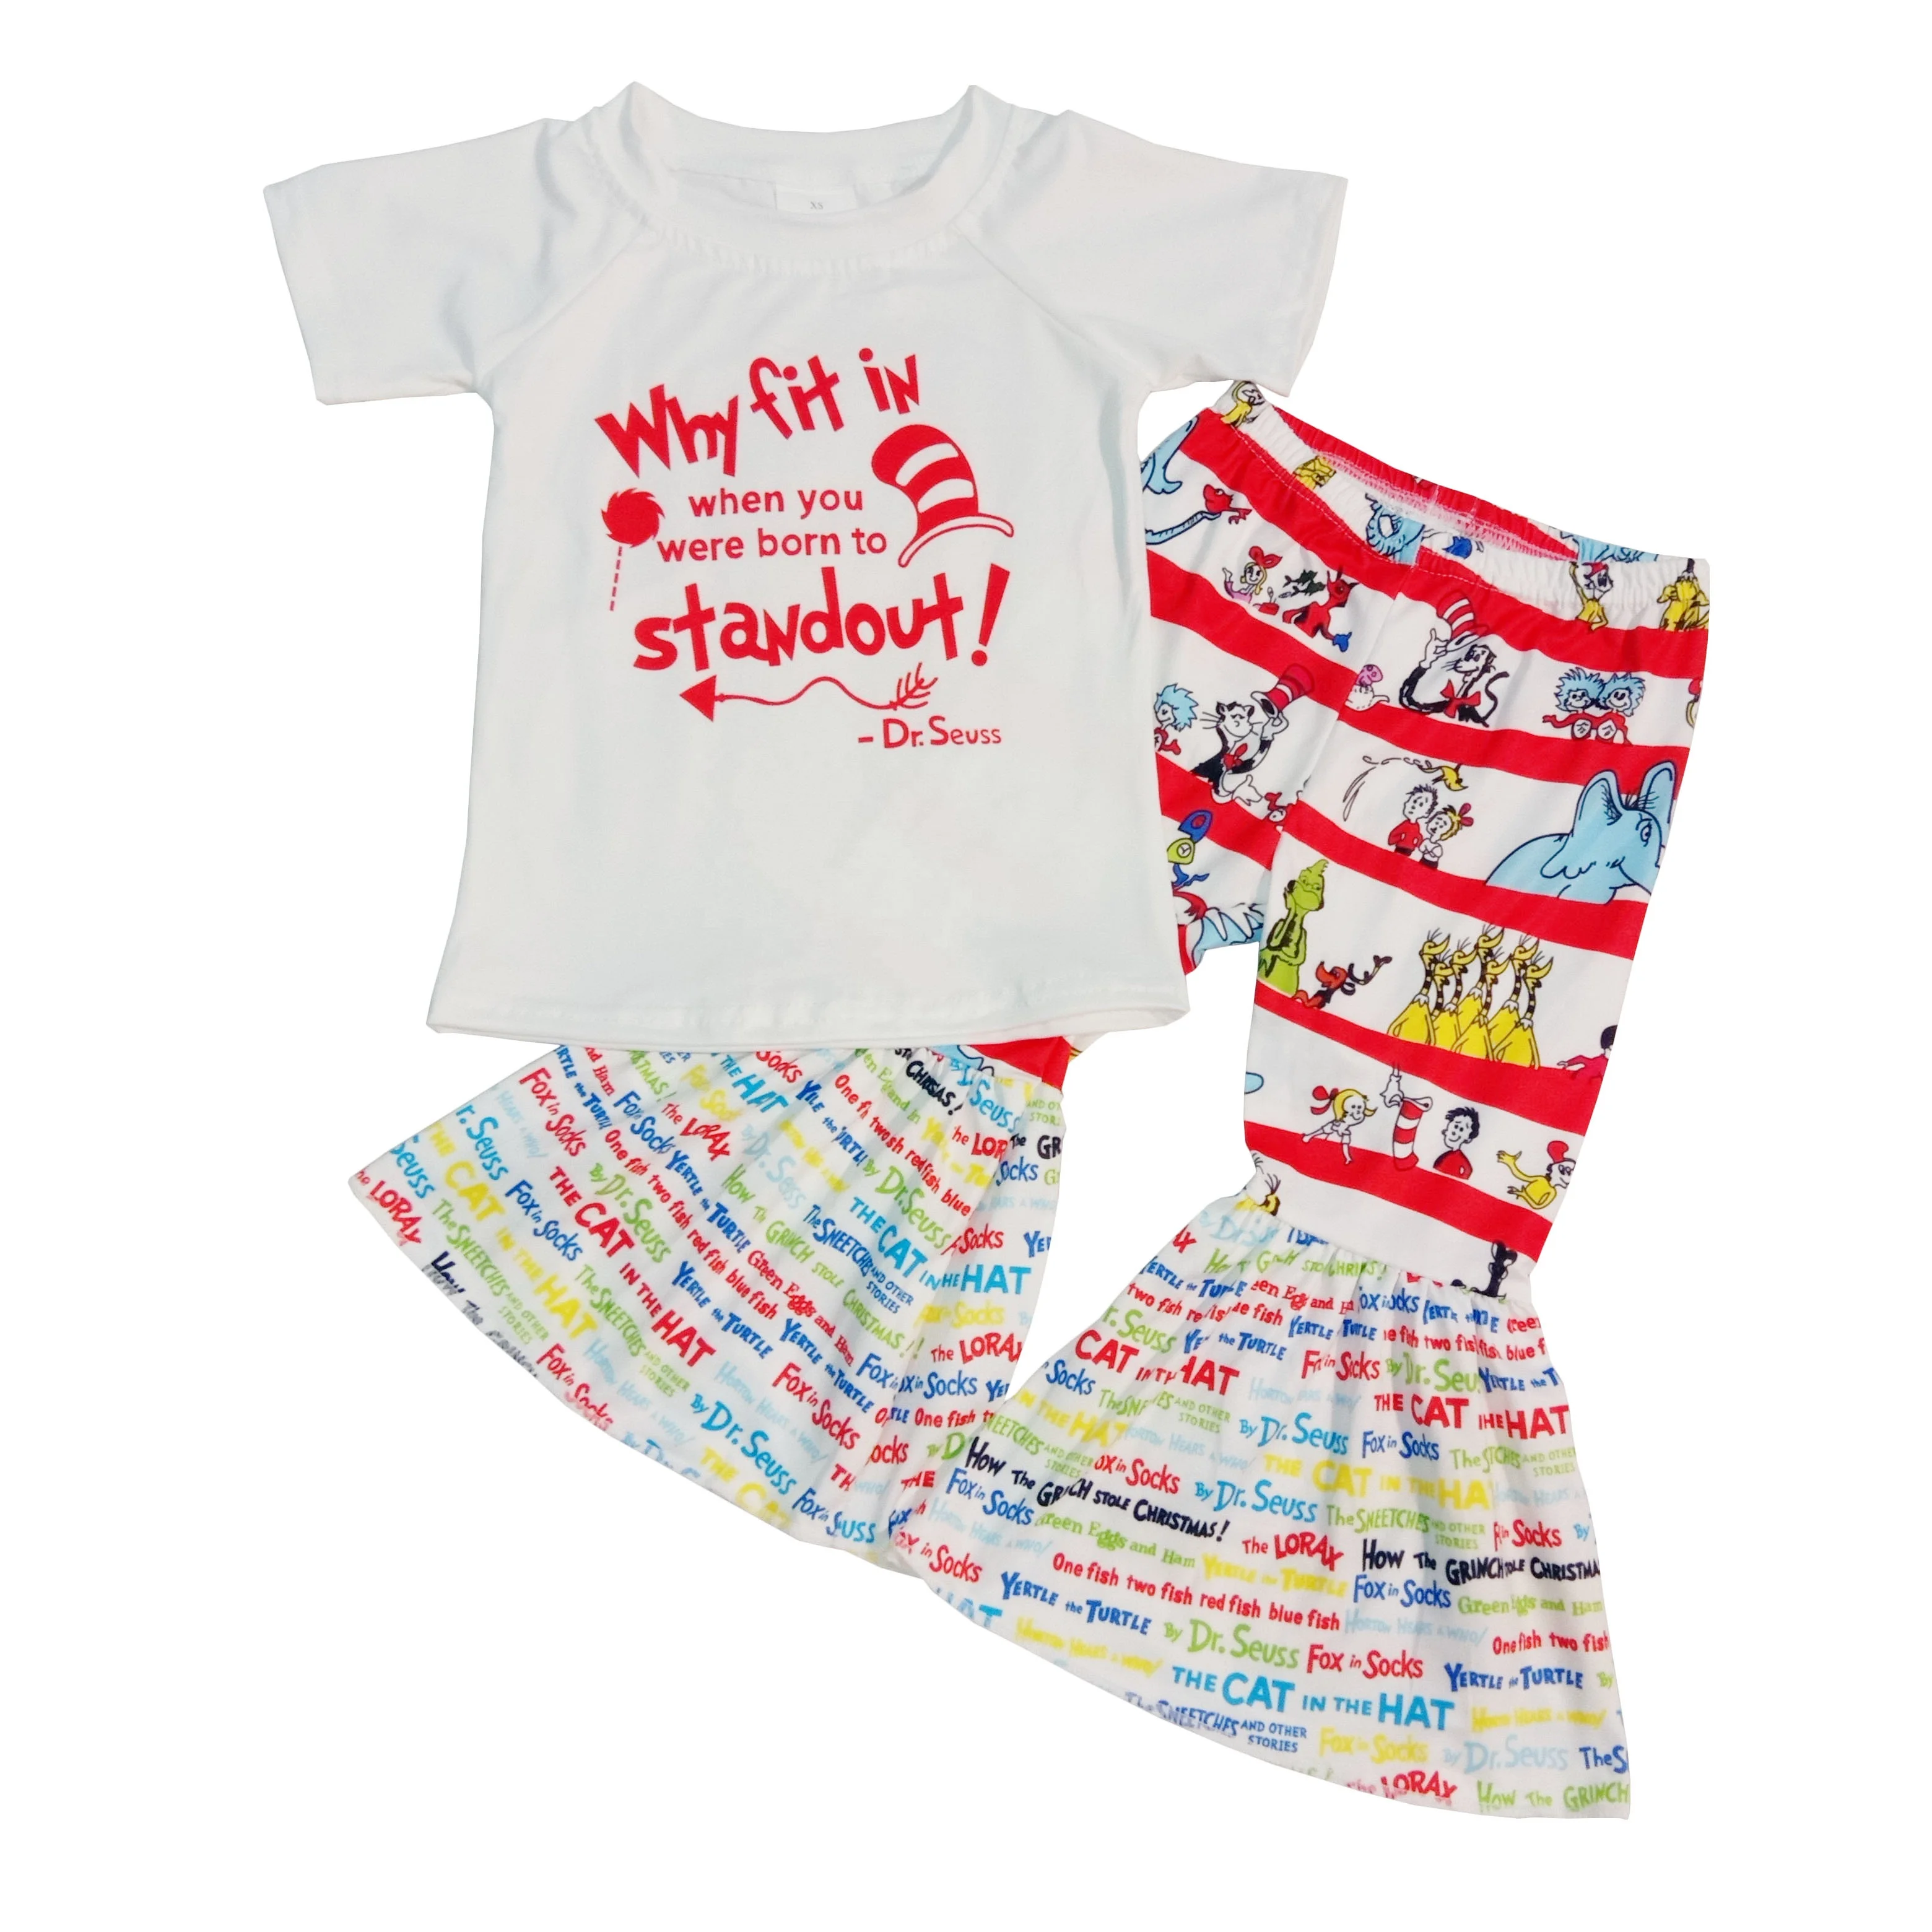 NEW Dr Seuss Cat in the Hat Shirt & Bell Bottoms Girls Boutique Outfit Set 